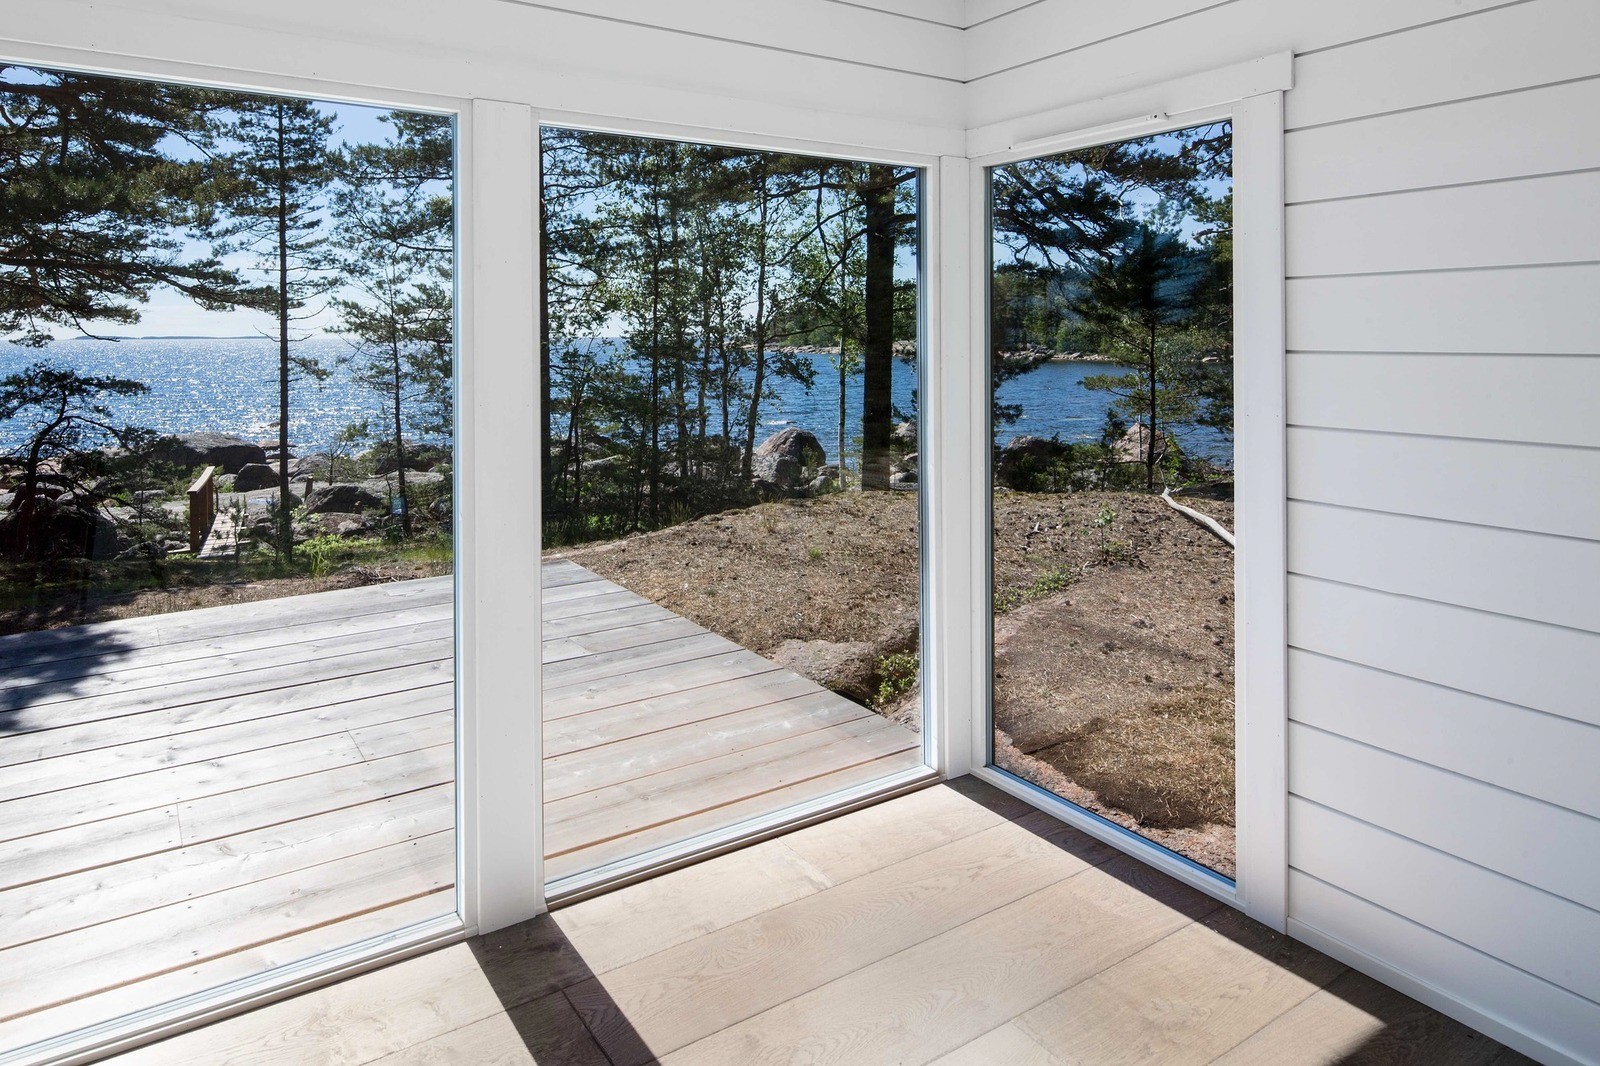 Summer house on a private island in the Baltic Sea